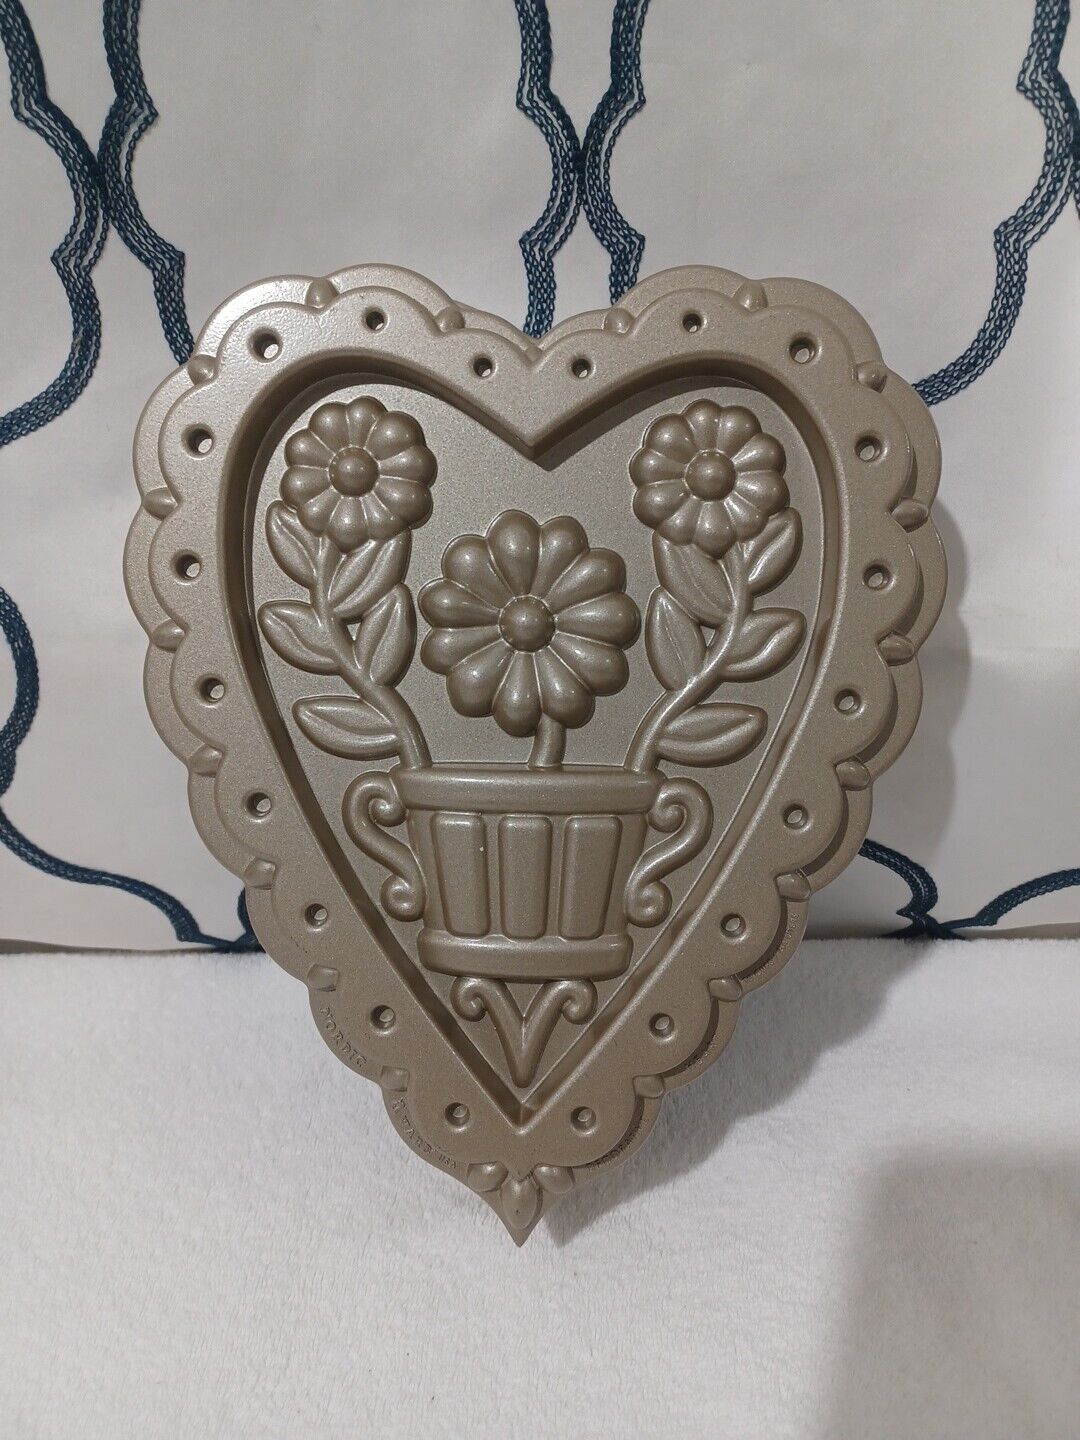 New WILLIAMS SONOMA Decorative Heart  NORDIC WARE Floral 10 Cup Cake Pan